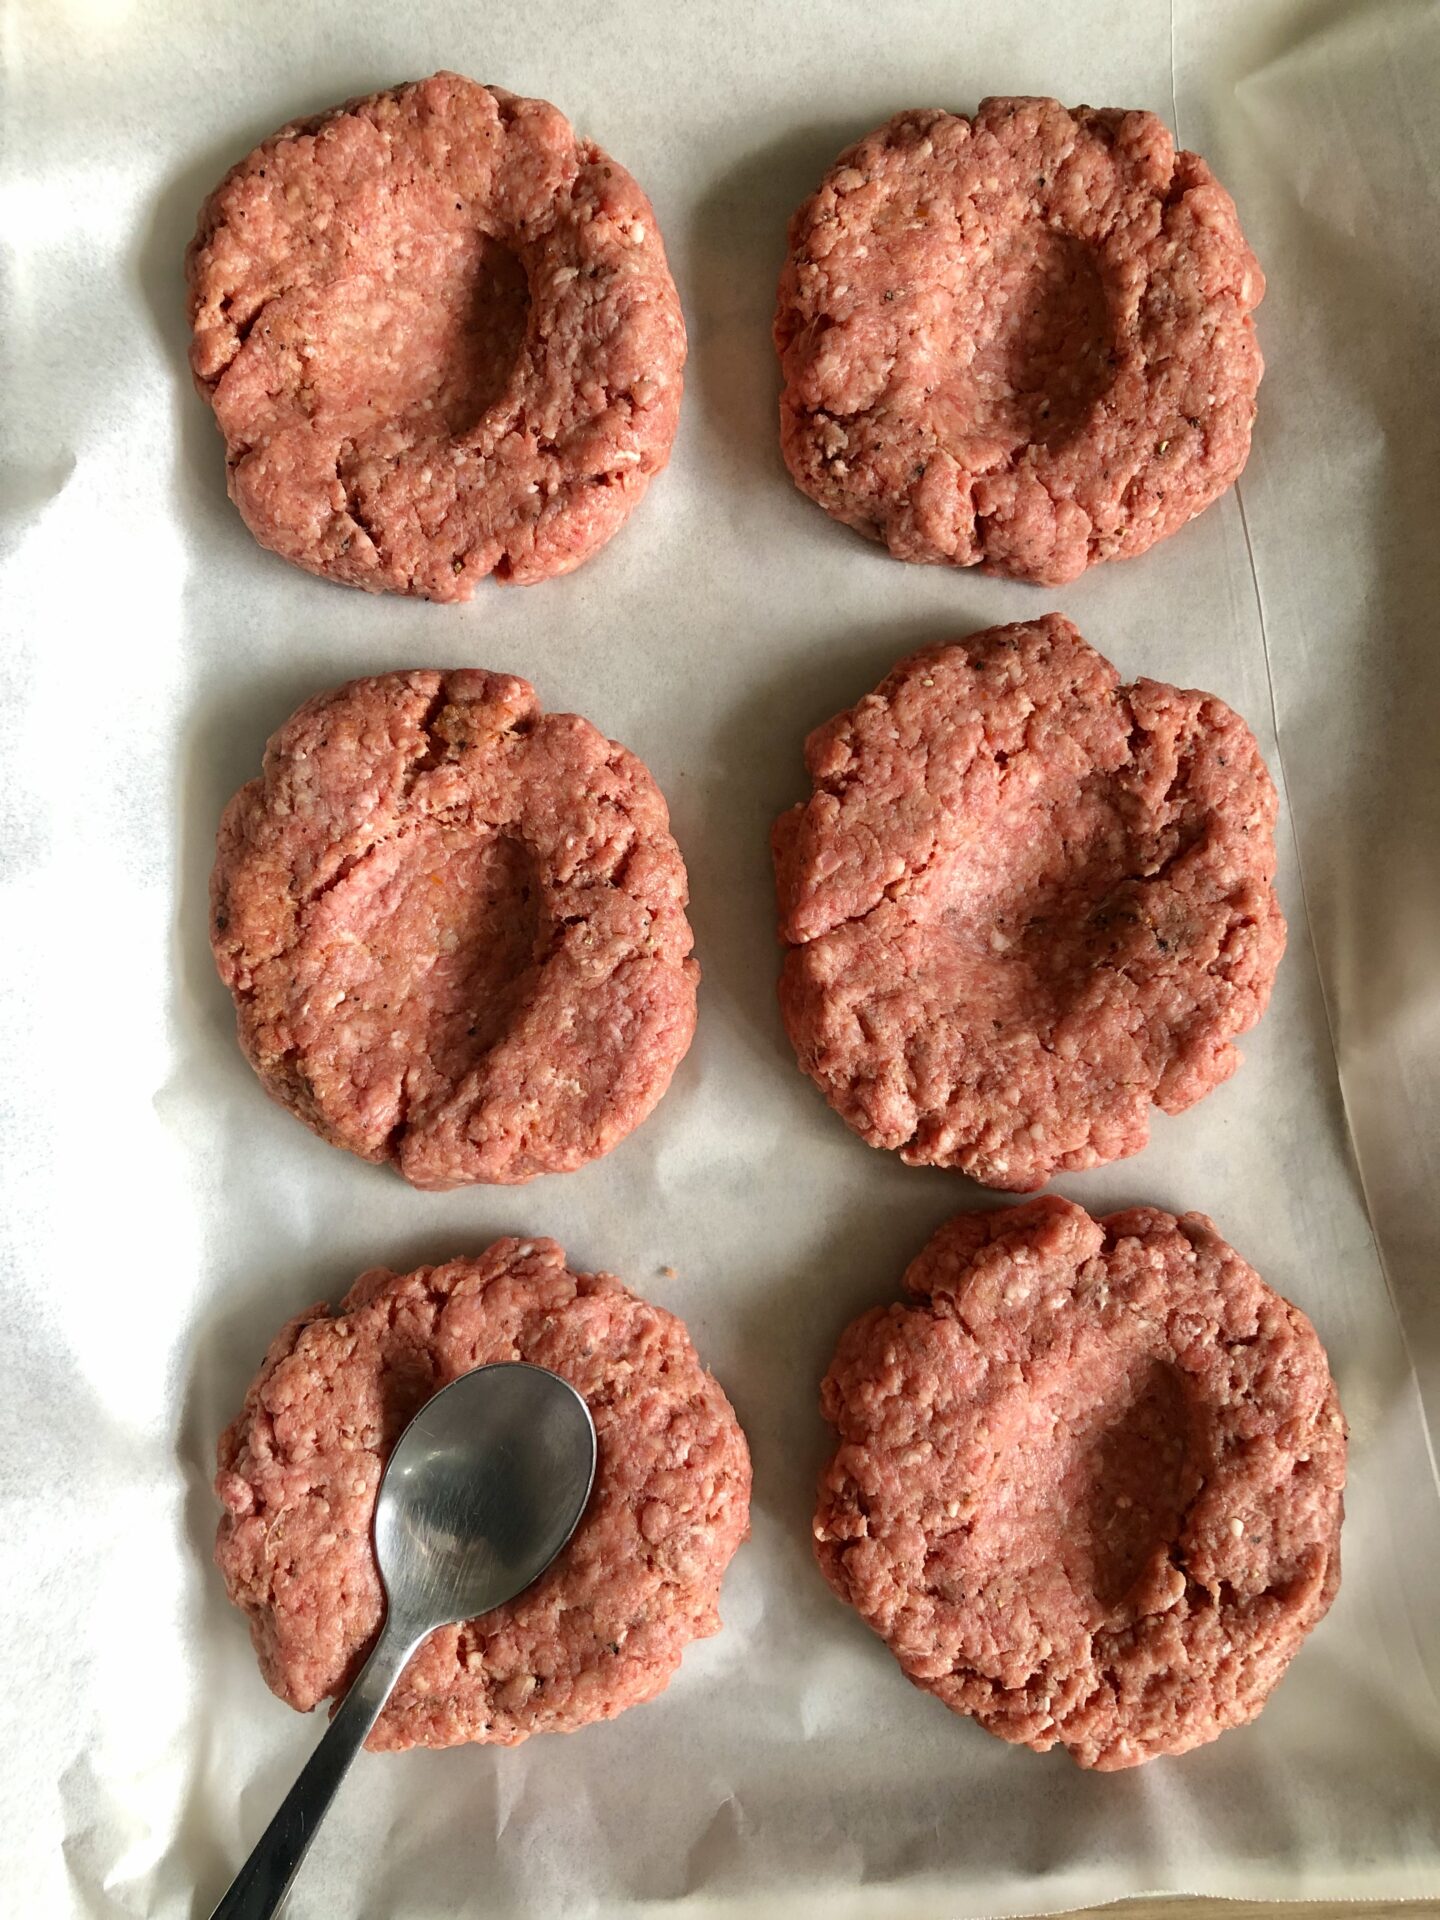 Uncooked beef burger patties on a tray with indentations